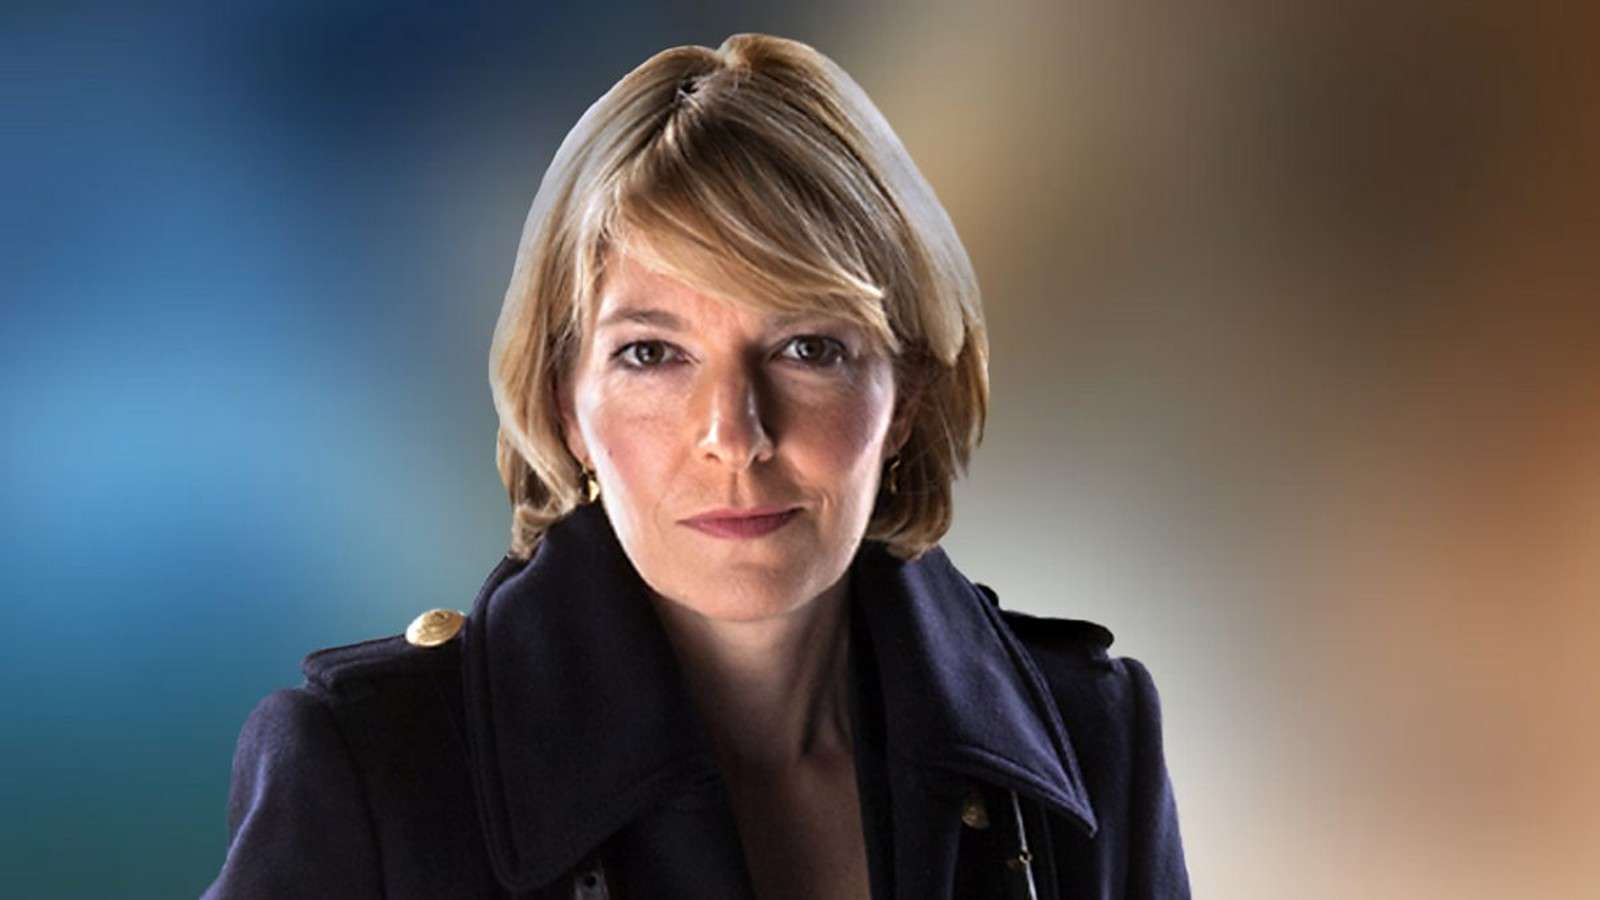 An image of Jemma Redgrave as Kate Stewart who is reportedly starring in the Doctor Who UNIT spinoff.